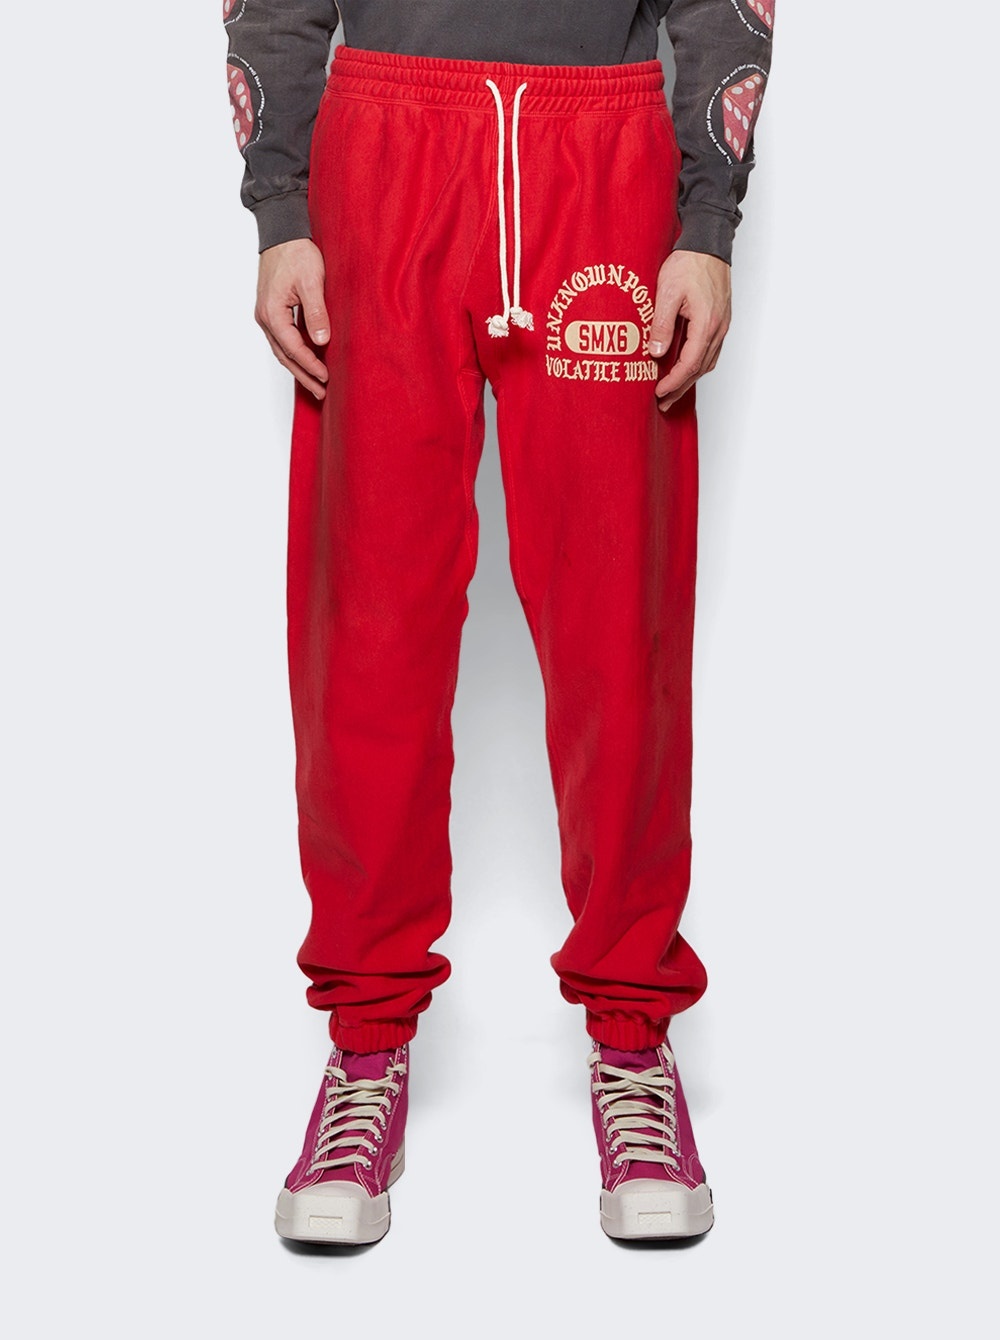 Unknown Power Sweatpants Red - 3